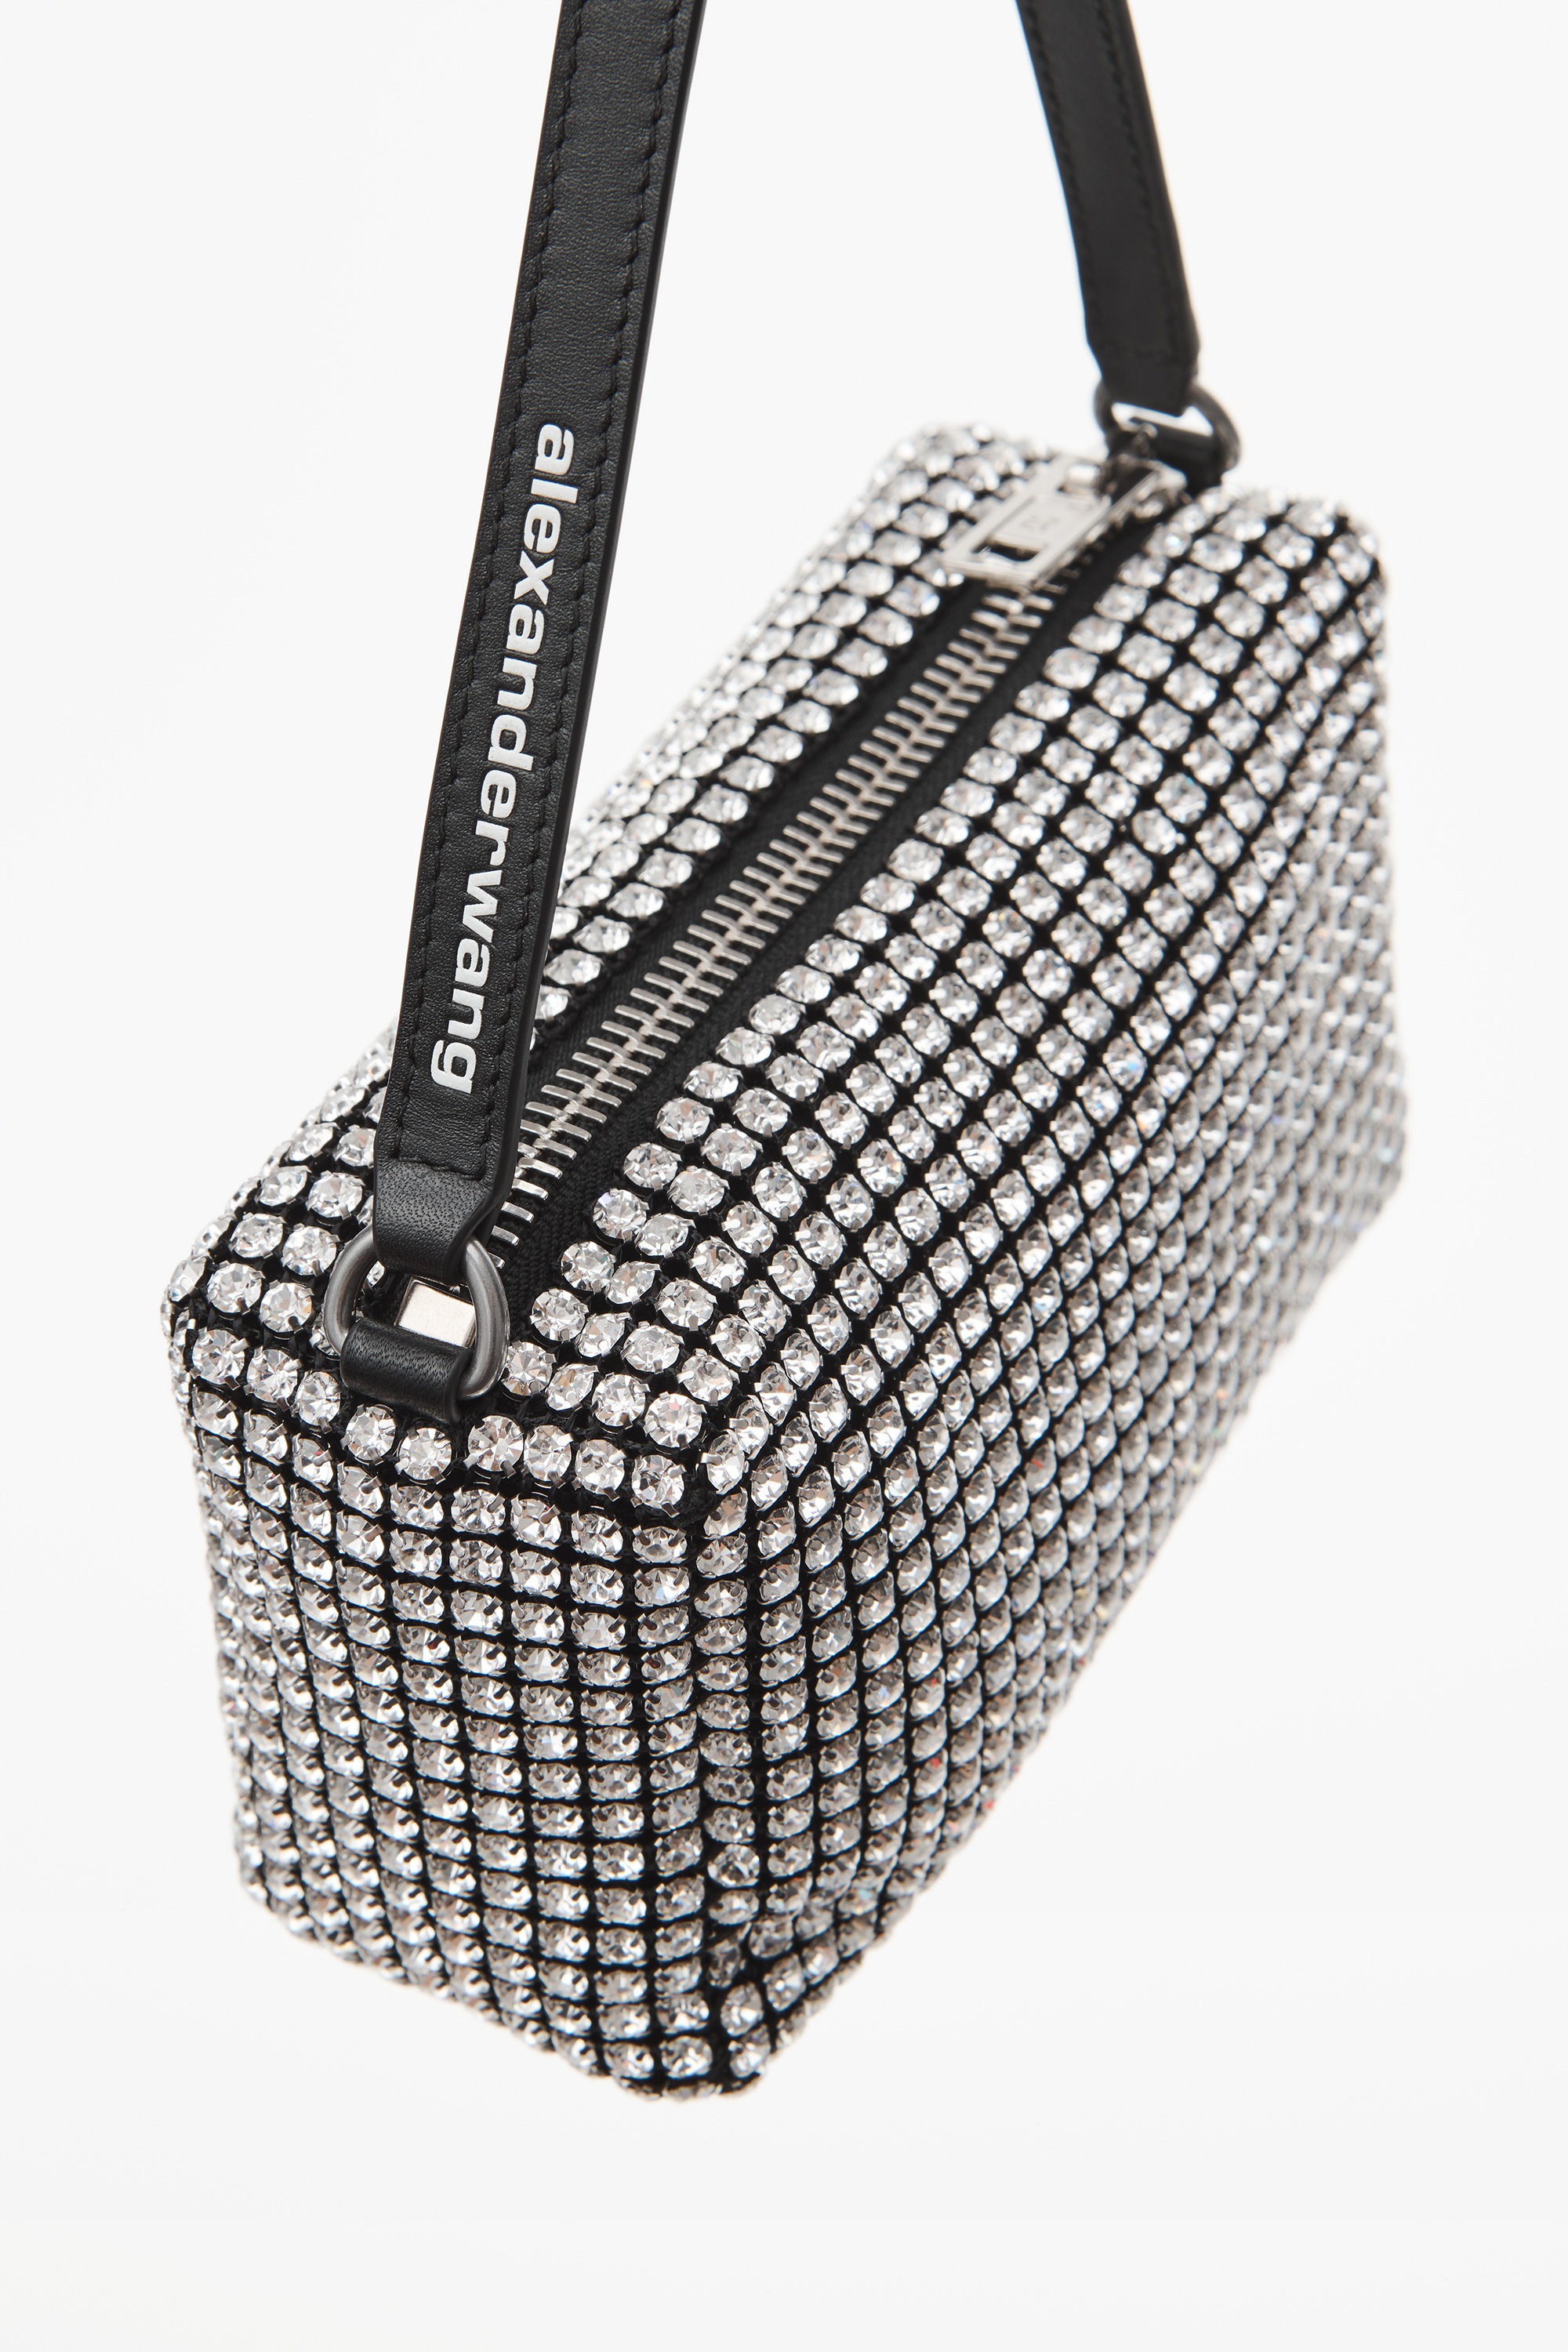 HEIRESS POUCH IN CRYSTAL MESH - 4